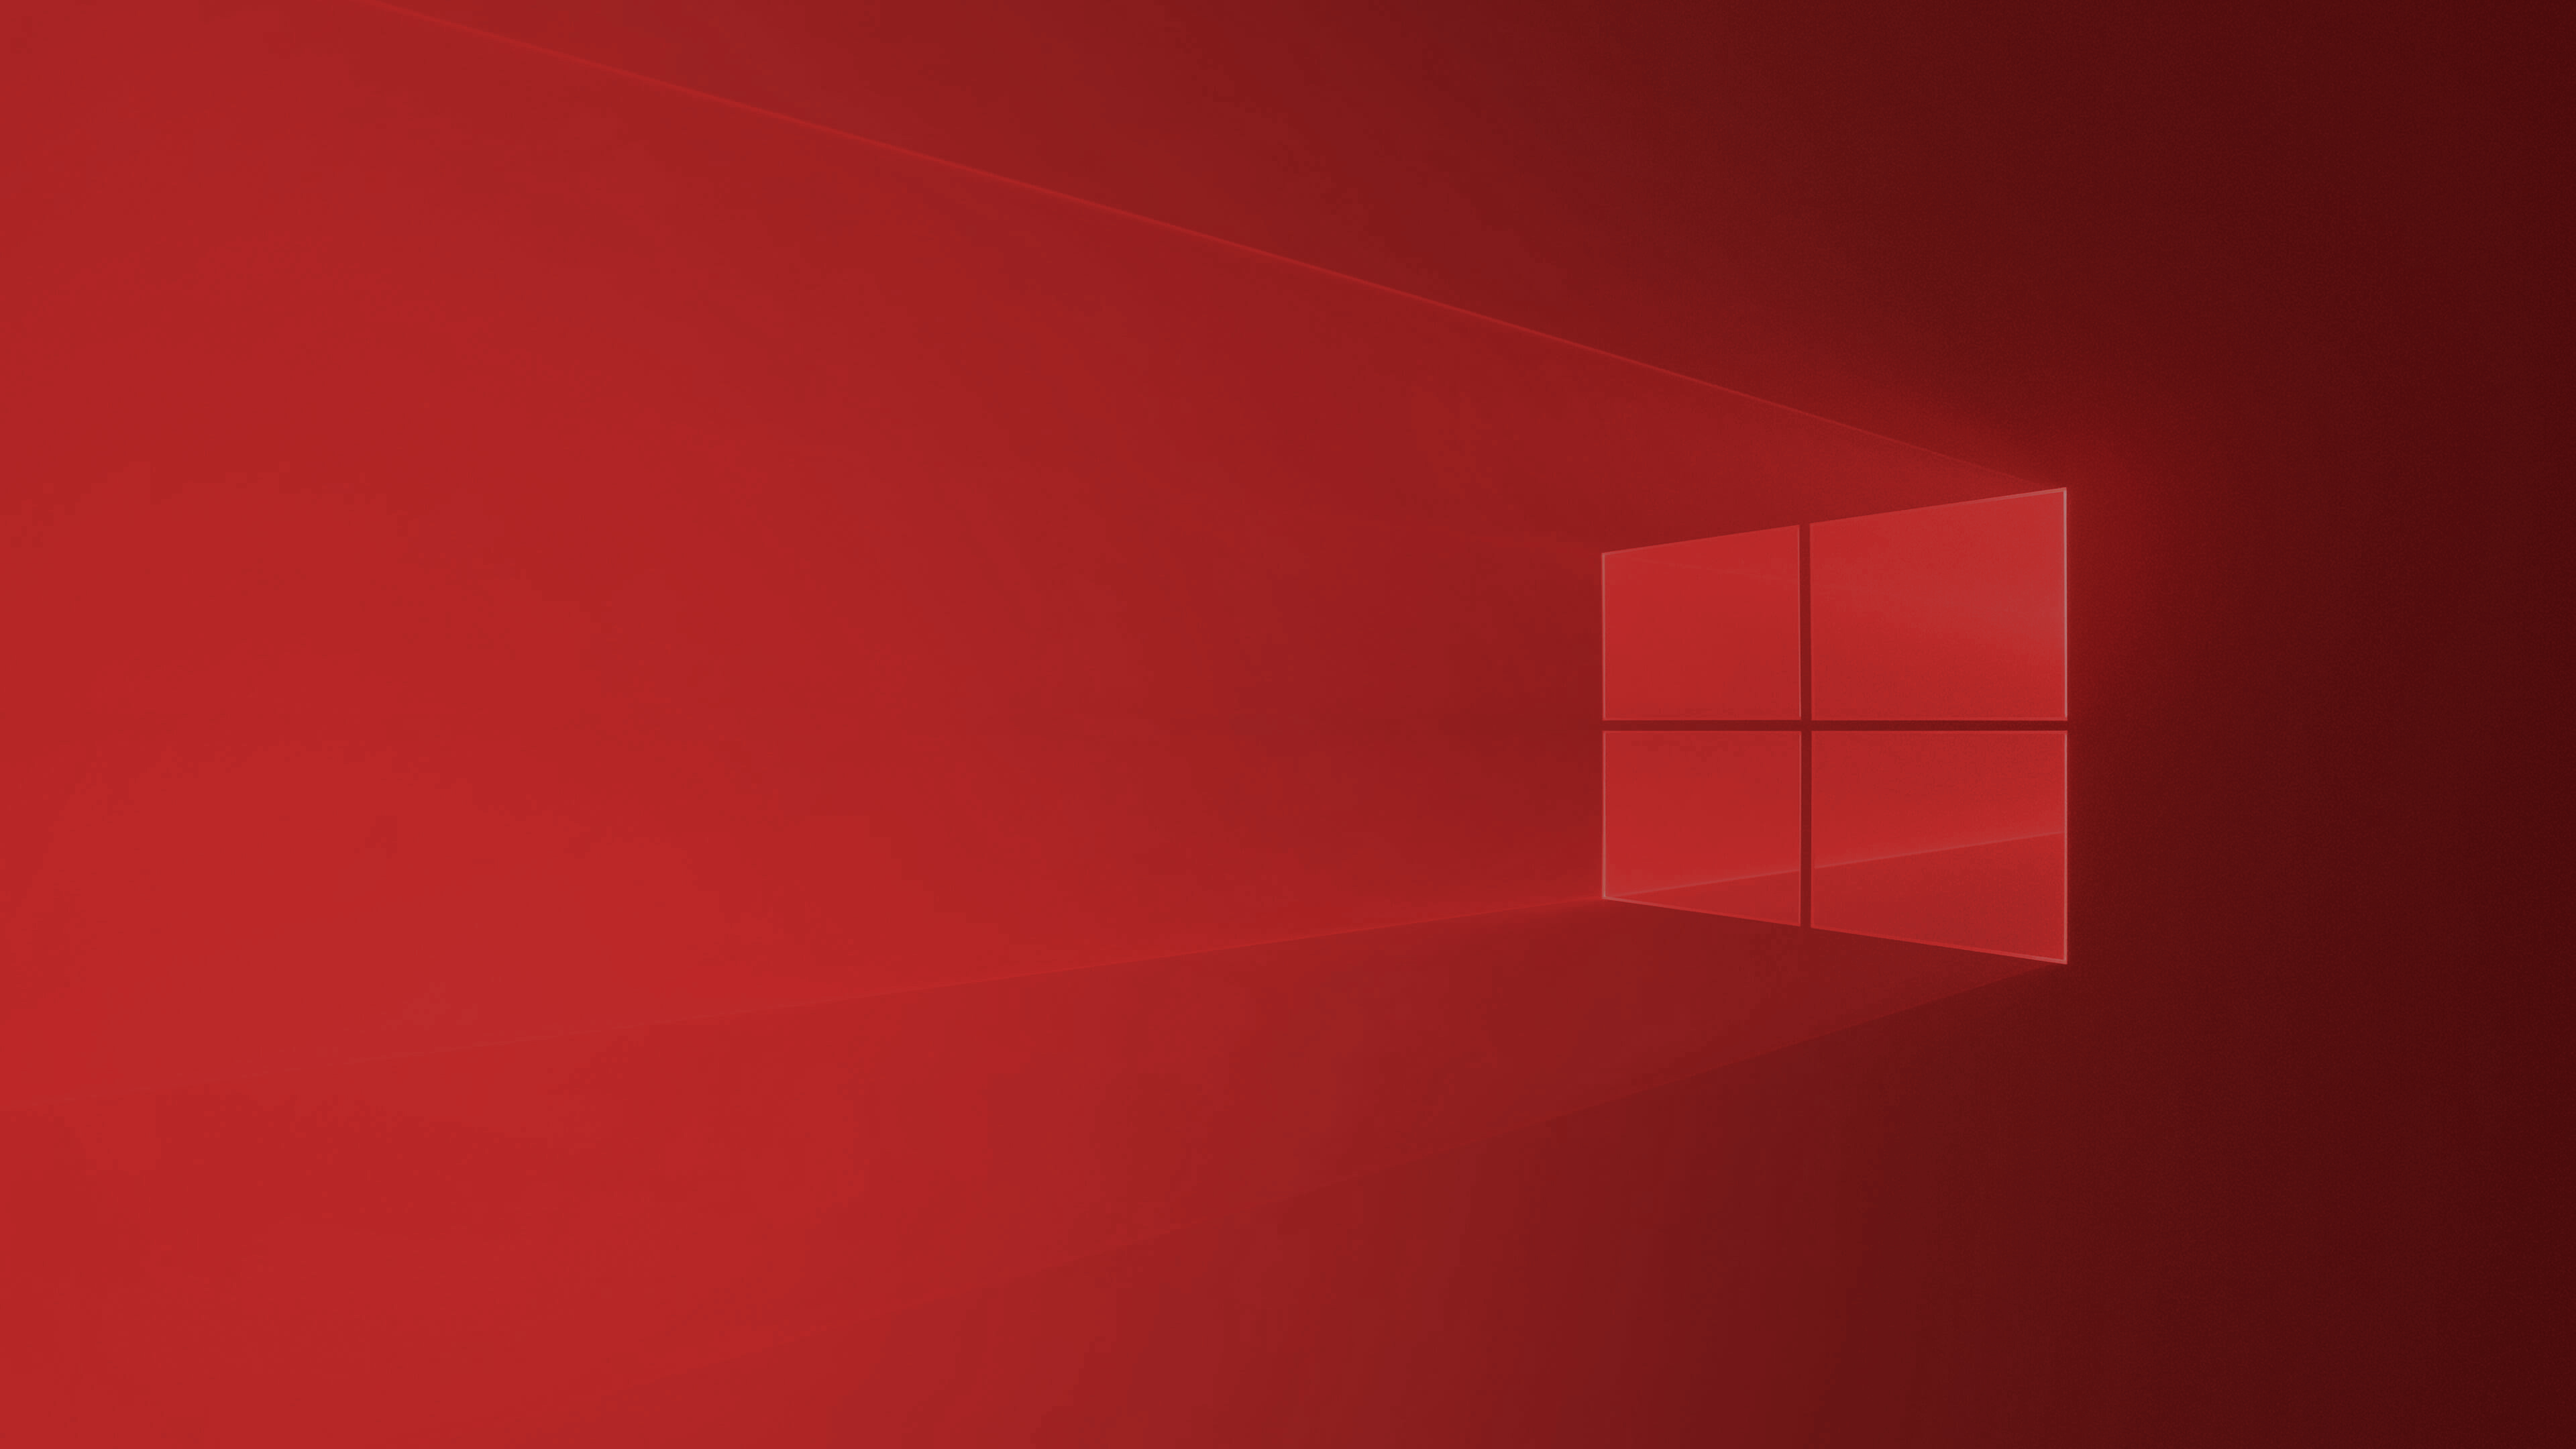 General 3840x2160 Windows 10 computer Software red Microsoft Windows minimalism azul red background simple background